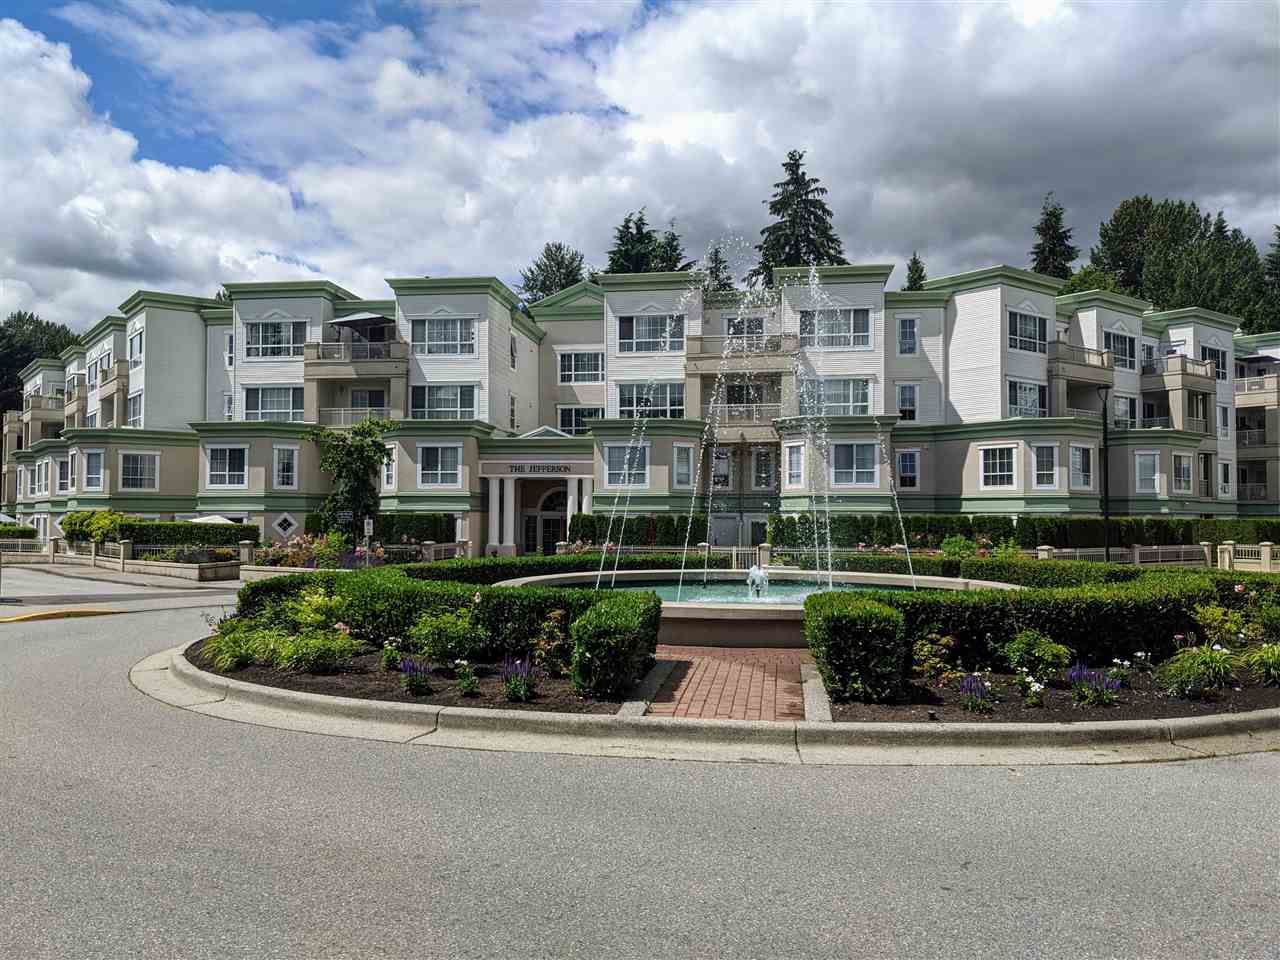 Main Photo: 101 2960 PRINCESS CRESCENT in Coquitlam: Canyon Springs Condo for sale : MLS®# R2474240